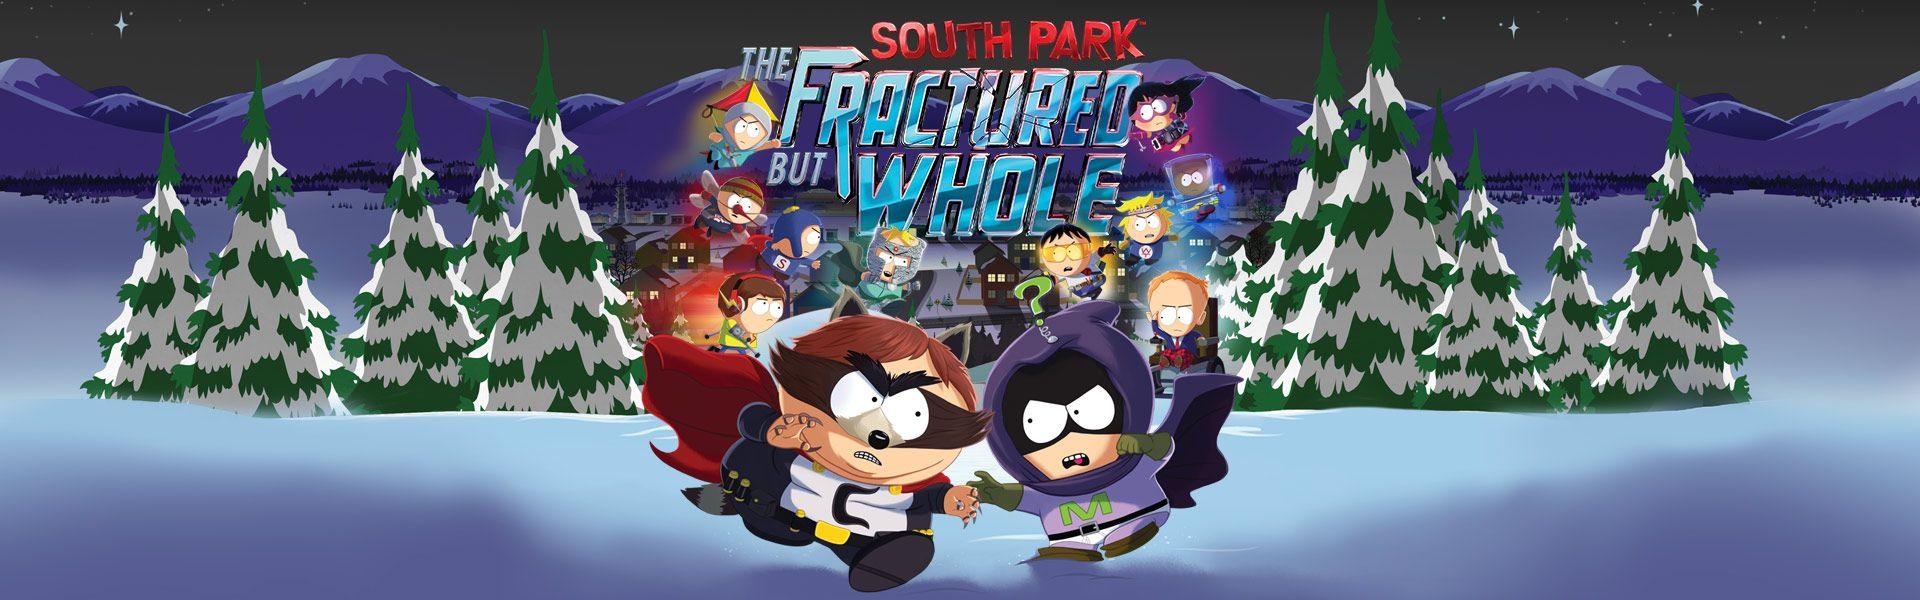 south park the fractured but whole free download